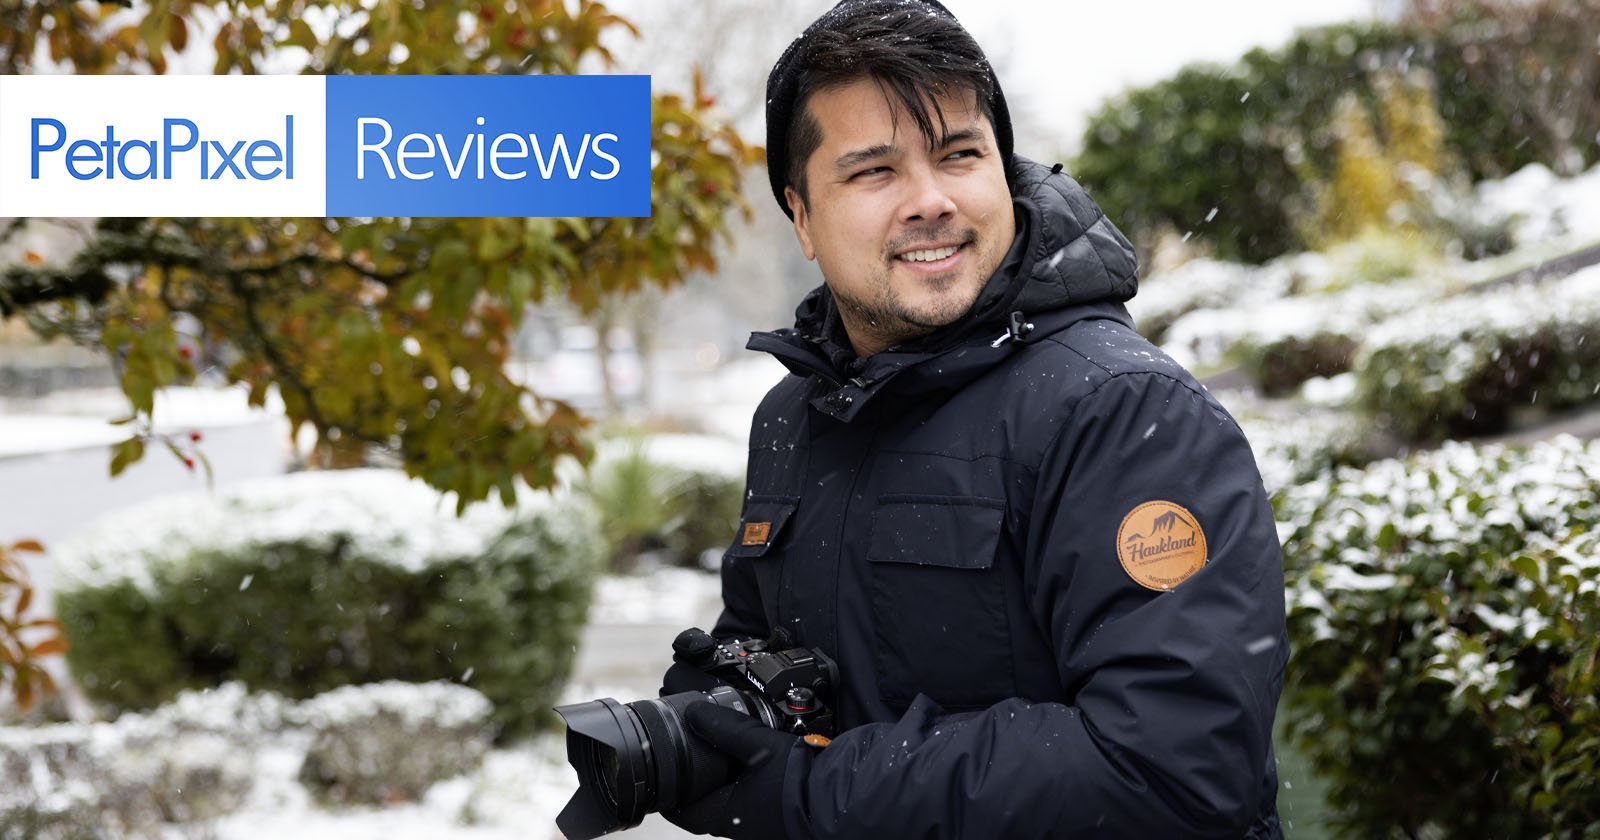 https://petapixel.com/assets/uploads/2022/12/Haukland-Photography-Jacket-Review-The-Only-Jacket-You-Will-Ever-Need.jpg